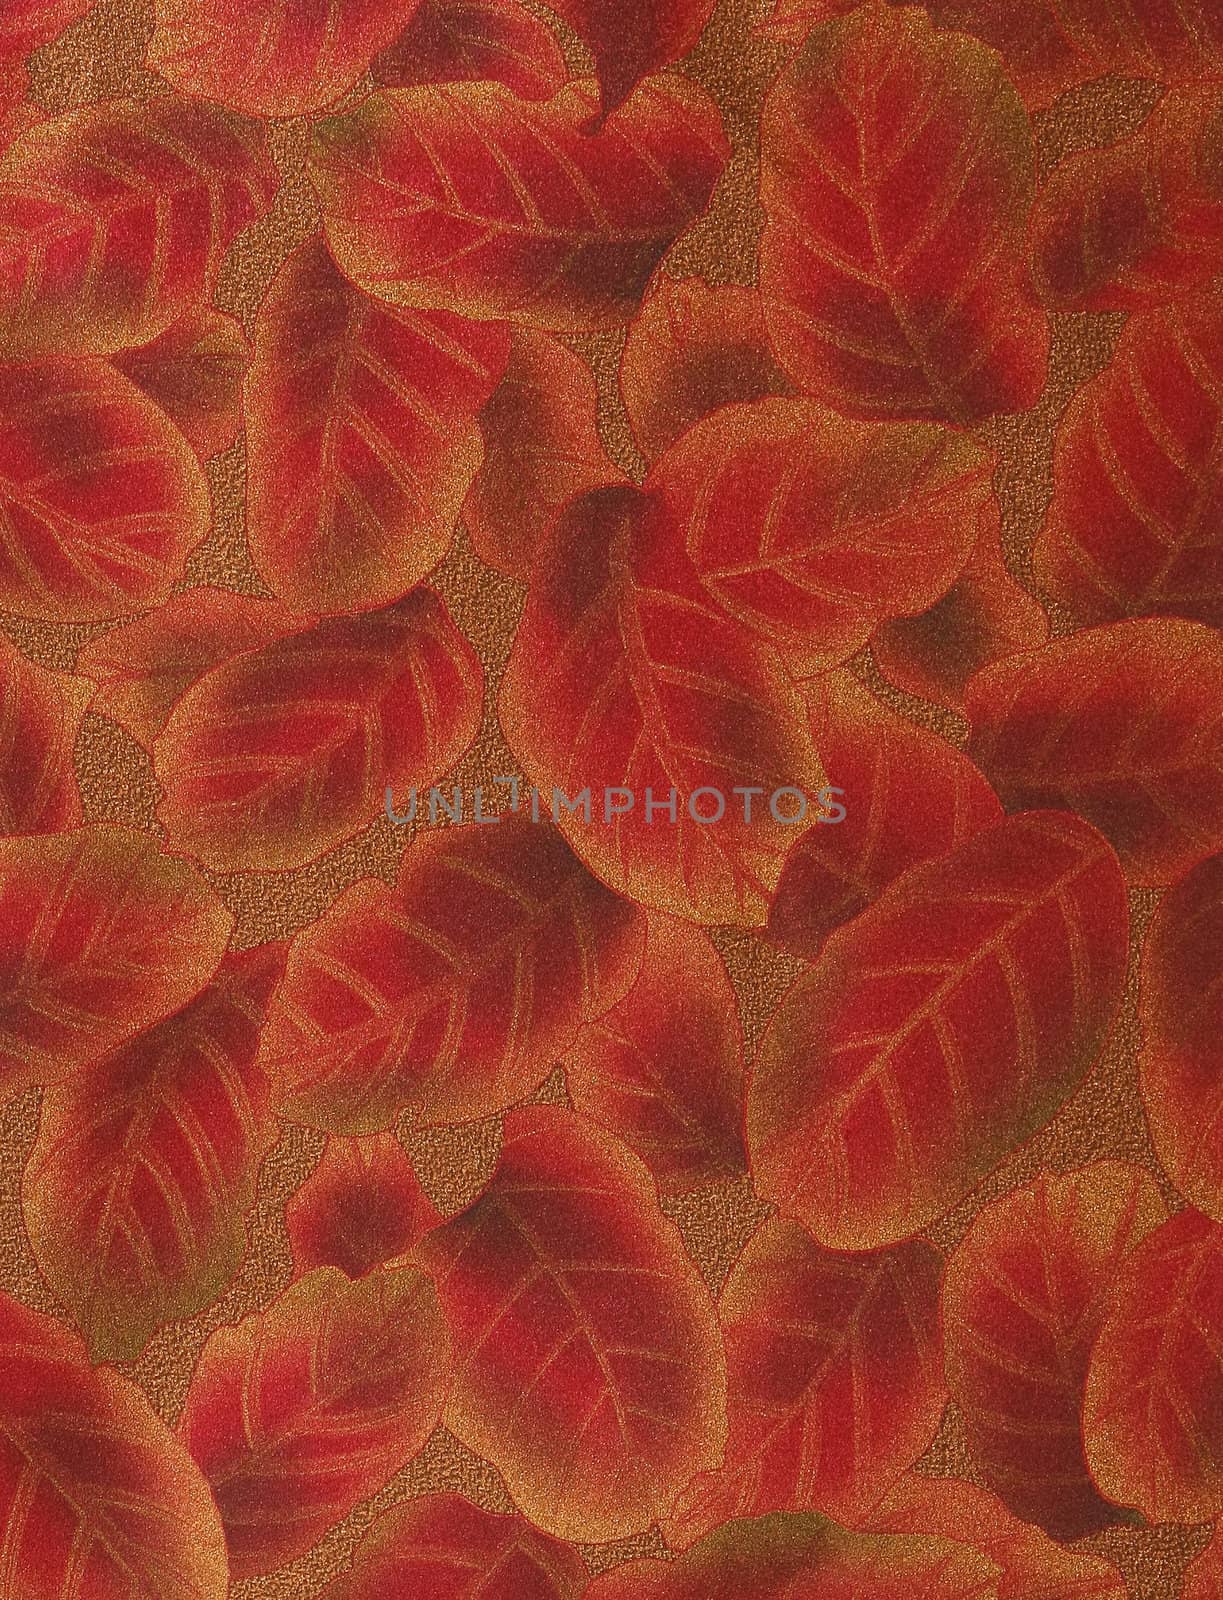 Abstract background with leafs red and gold